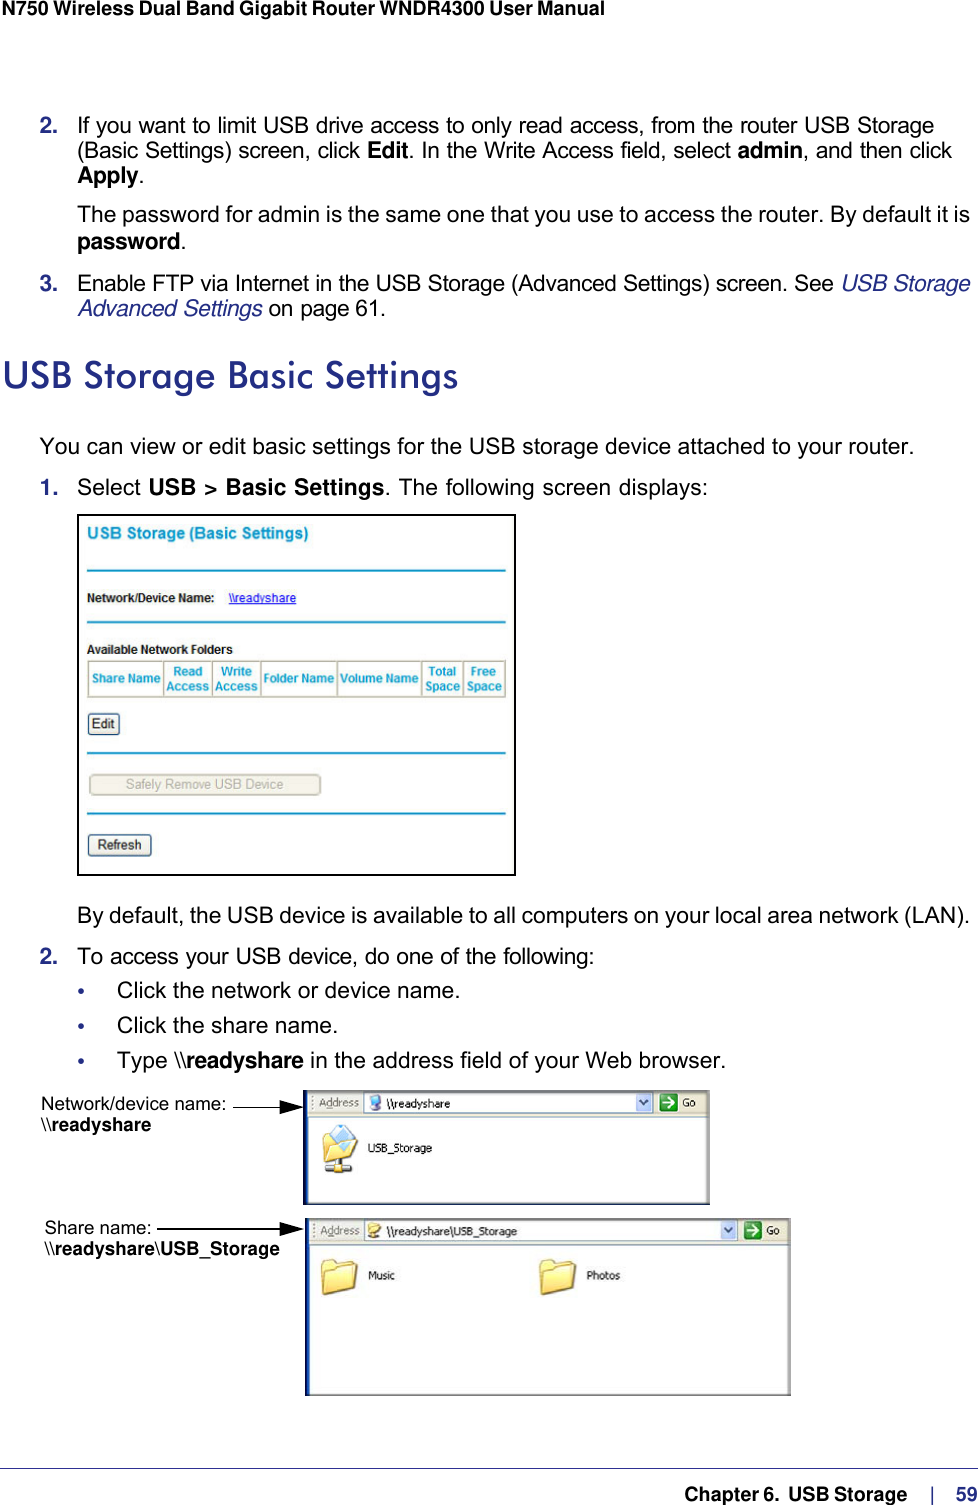   Chapter 6.  USB Storage     |    59N750 Wireless Dual Band Gigabit Router WNDR4300 User Manual 2.  If you want to limit USB drive access to only read access, from the router USB Storage (Basic Settings) screen, click Edit. In the Write Access field, select admin, and then click Apply.The password for admin is the same one that you use to access the router. By default it is password.3.  Enable FTP via Internet in the USB Storage (Advanced Settings) screen. See USB Storage Advanced Settings on page 61.USB Storage Basic SettingsYou can view or edit basic settings for the USB storage device attached to your router. 1.  Select USB &gt; Basic Settings. The following screen displays:By default, the USB device is available to all computers on your local area network (LAN). 2.  To access your USB device, do one of the following:•     Click the network or device name.•     Click the share name.•     Type \\readyshare in the address field of your Web browser.Network/device name:Share name:\\readyshare\\readyshare\USB_Storage